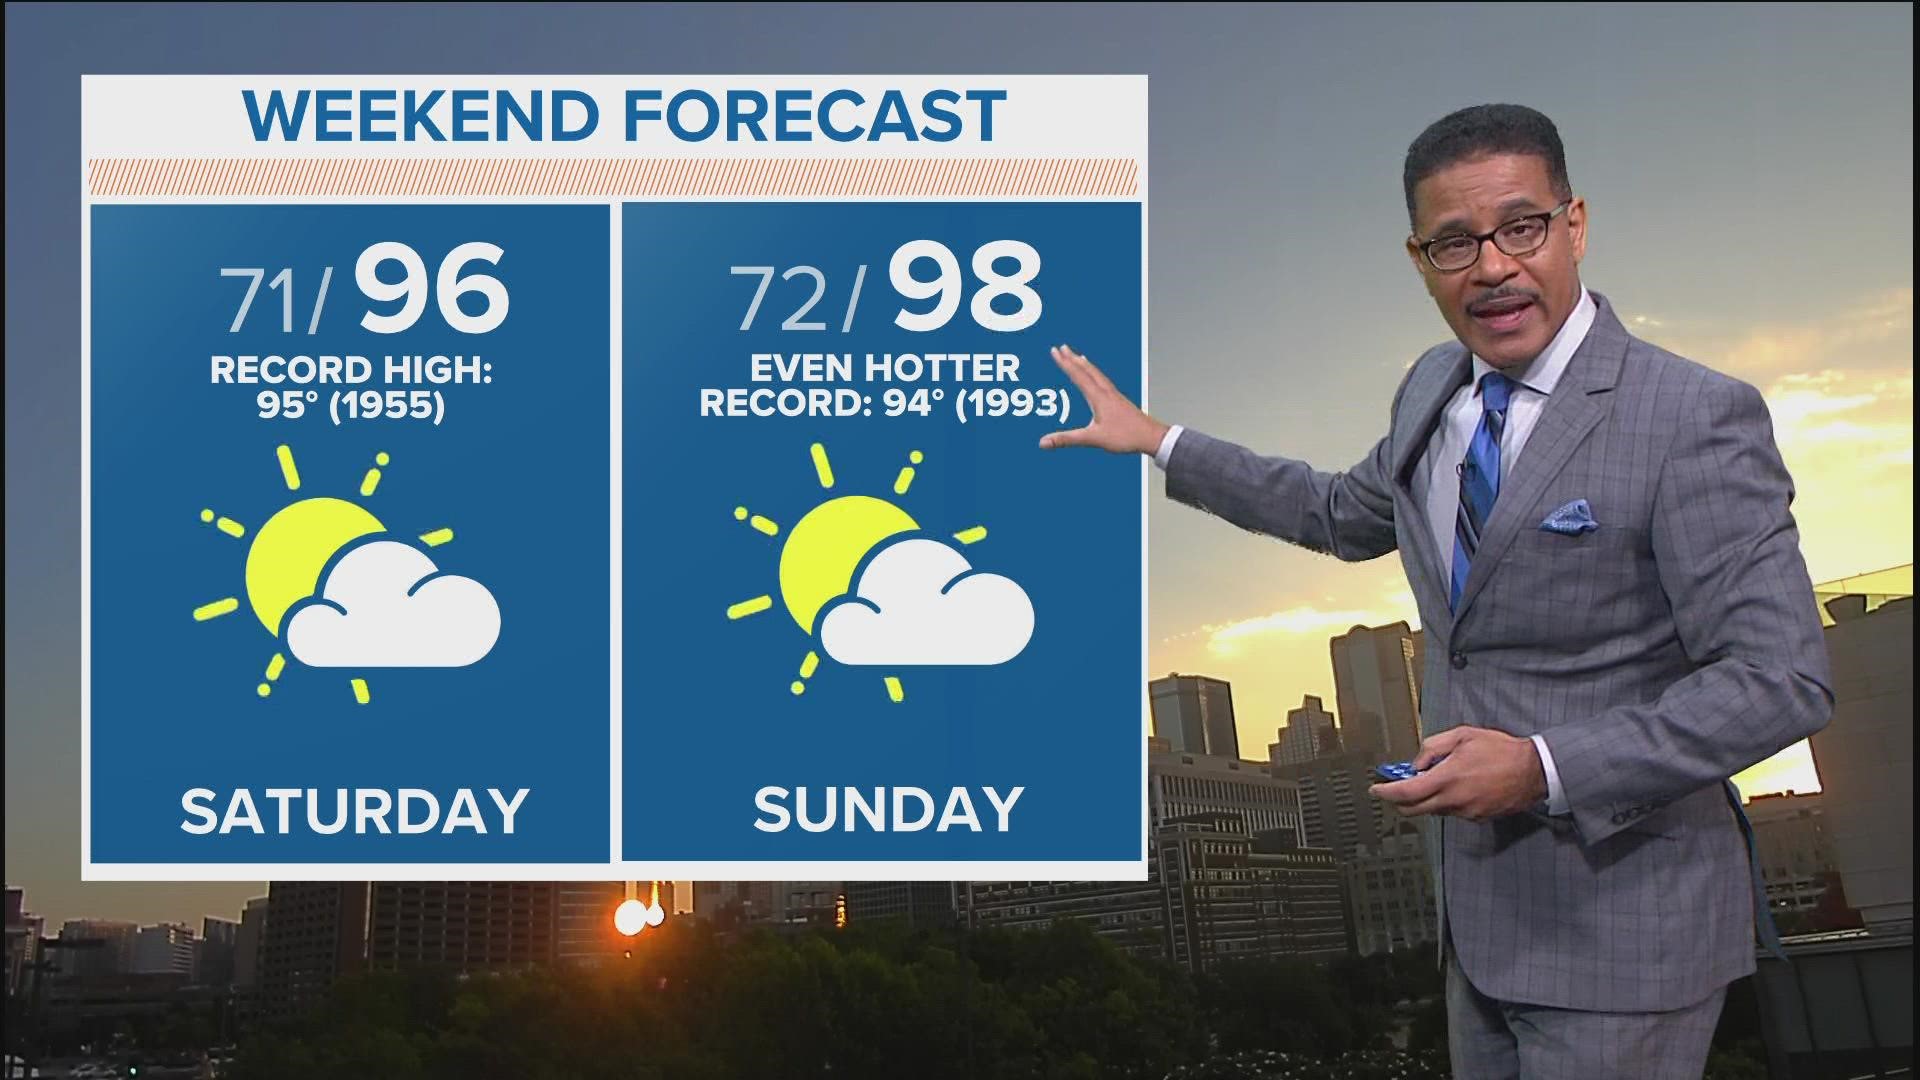 We're well above seasonal averages for high temperatures heading into the weekend.